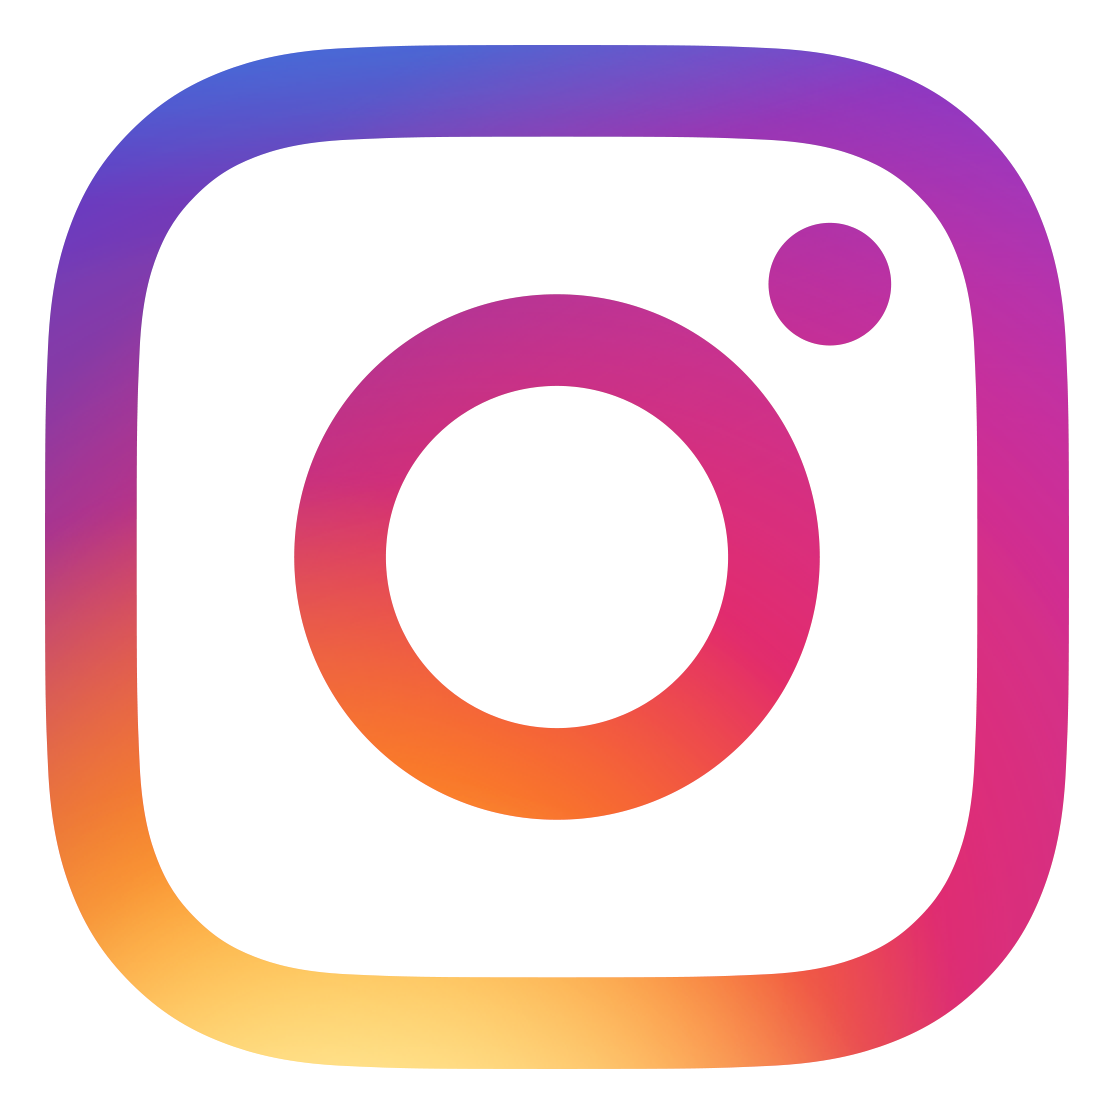 Check Out Our Instagram!